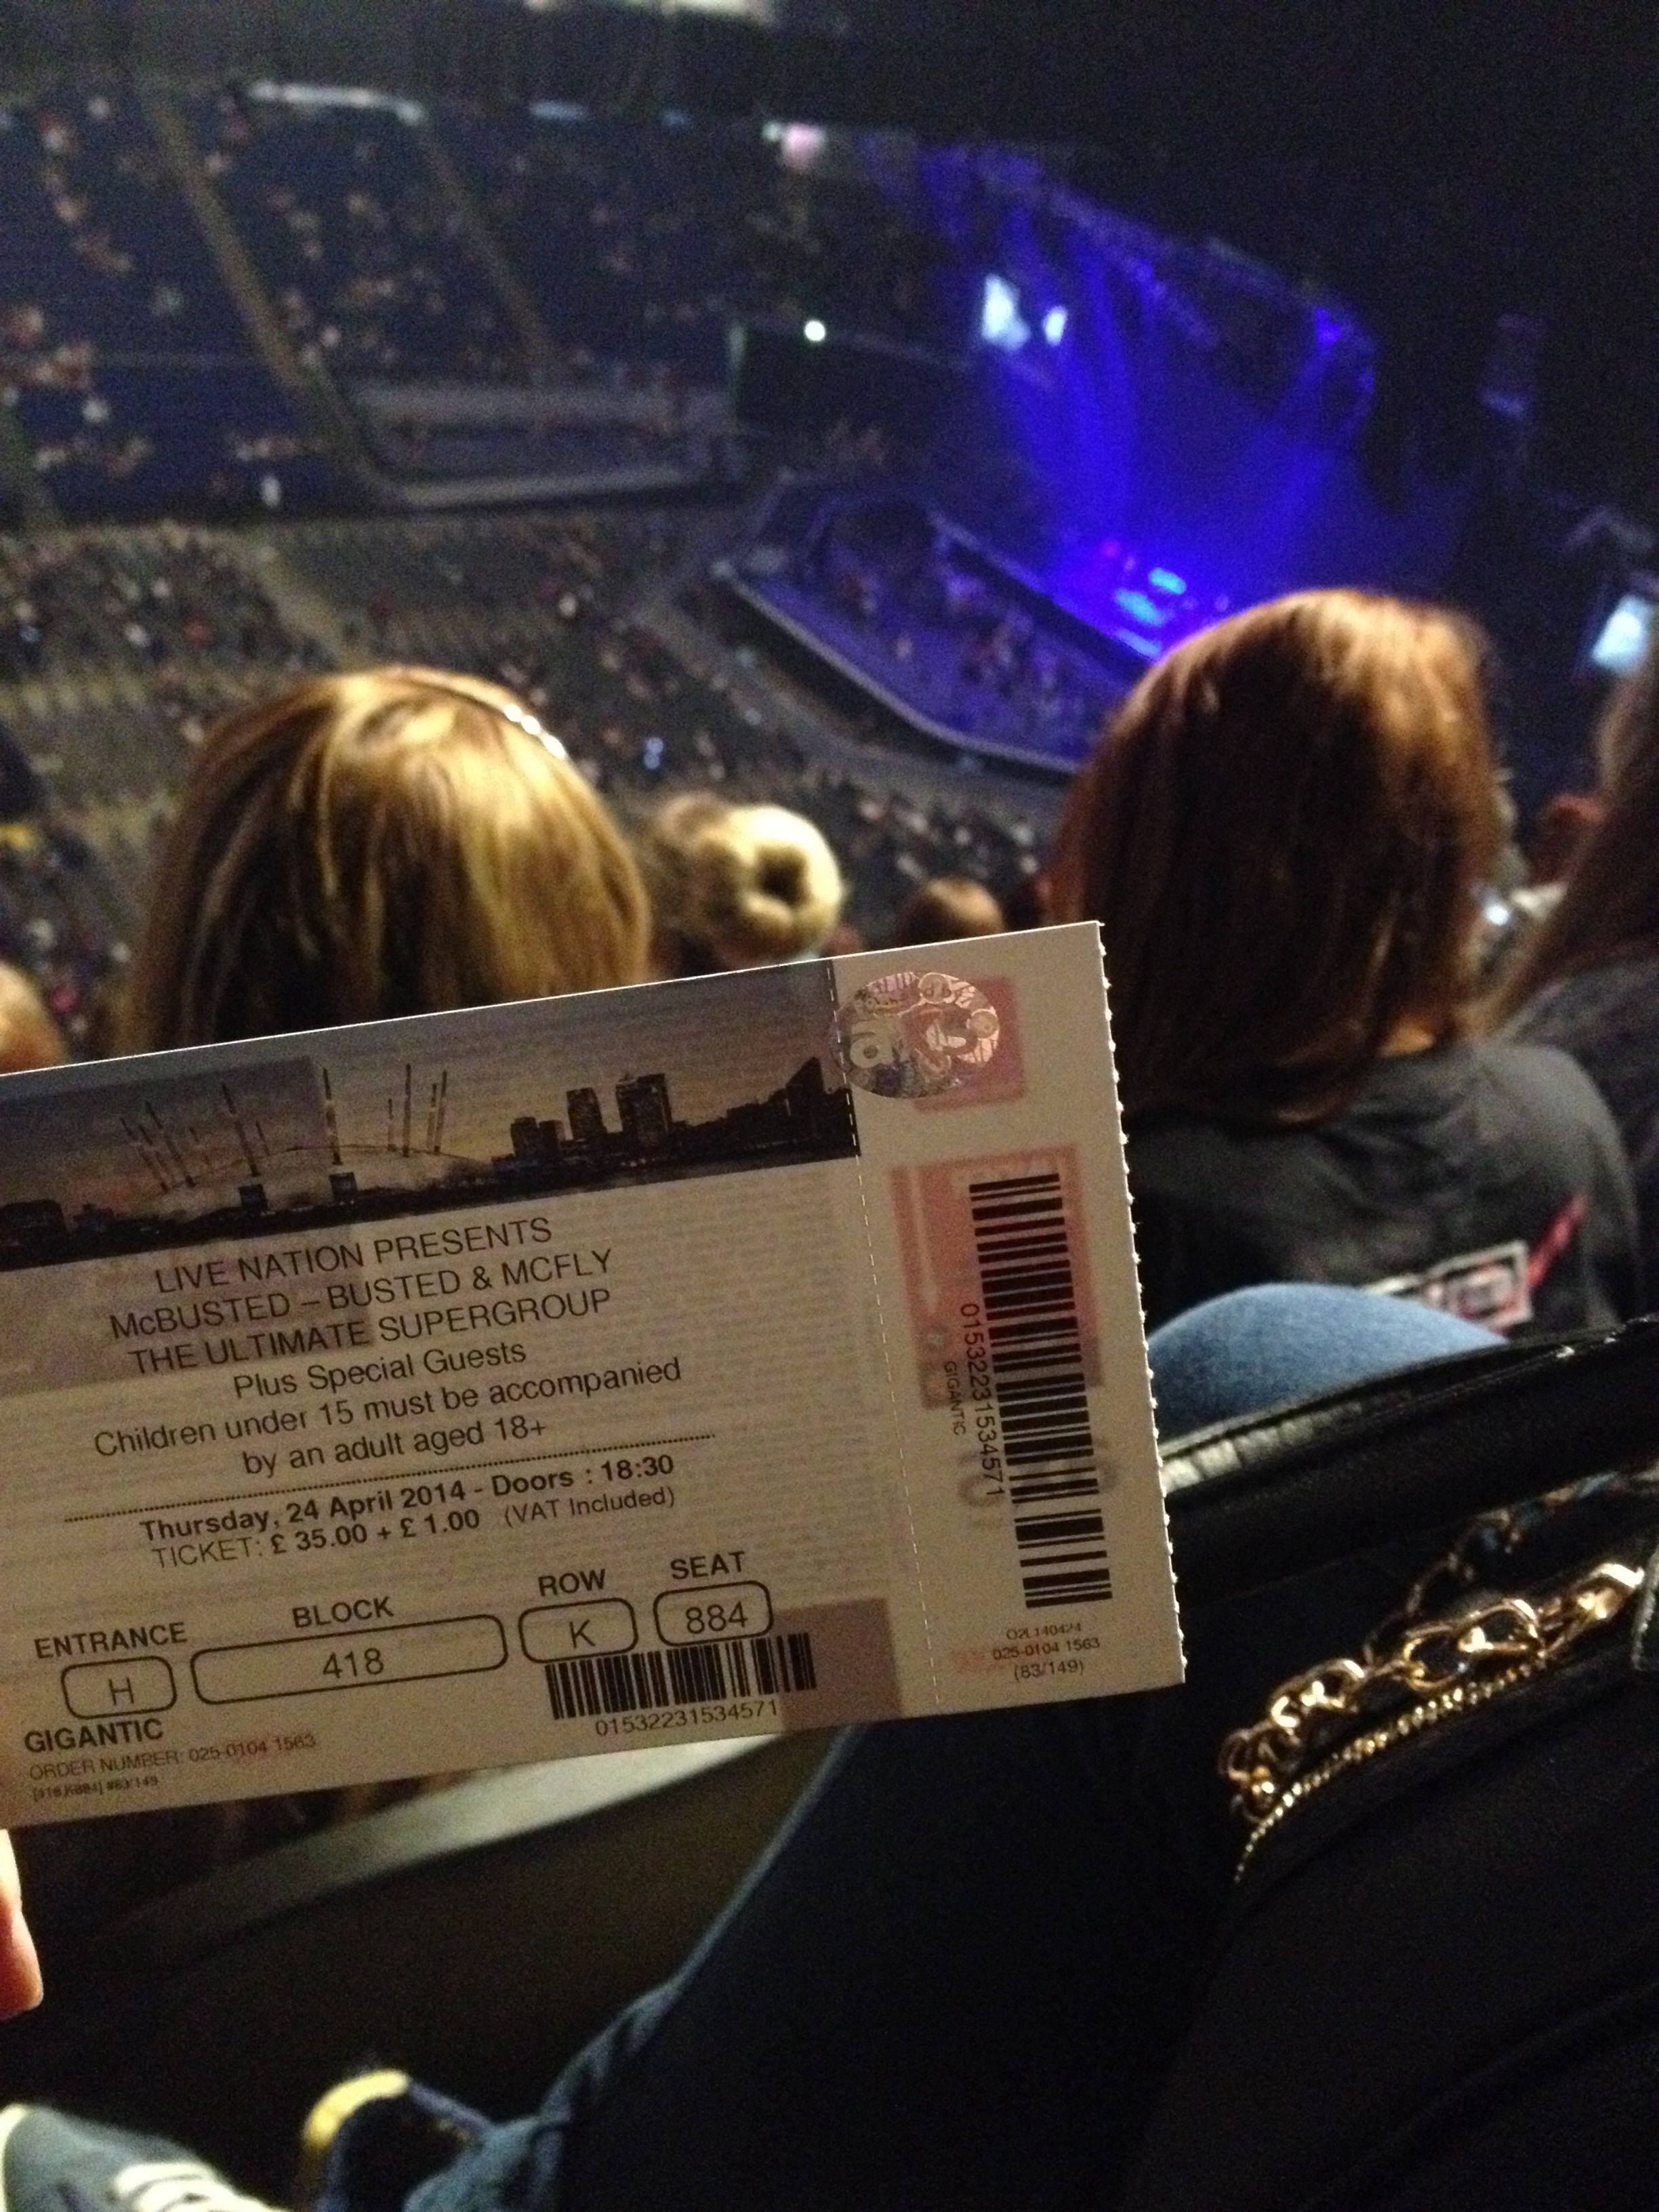 View from O2 Arena (London) Block 418 Row K Seat 884